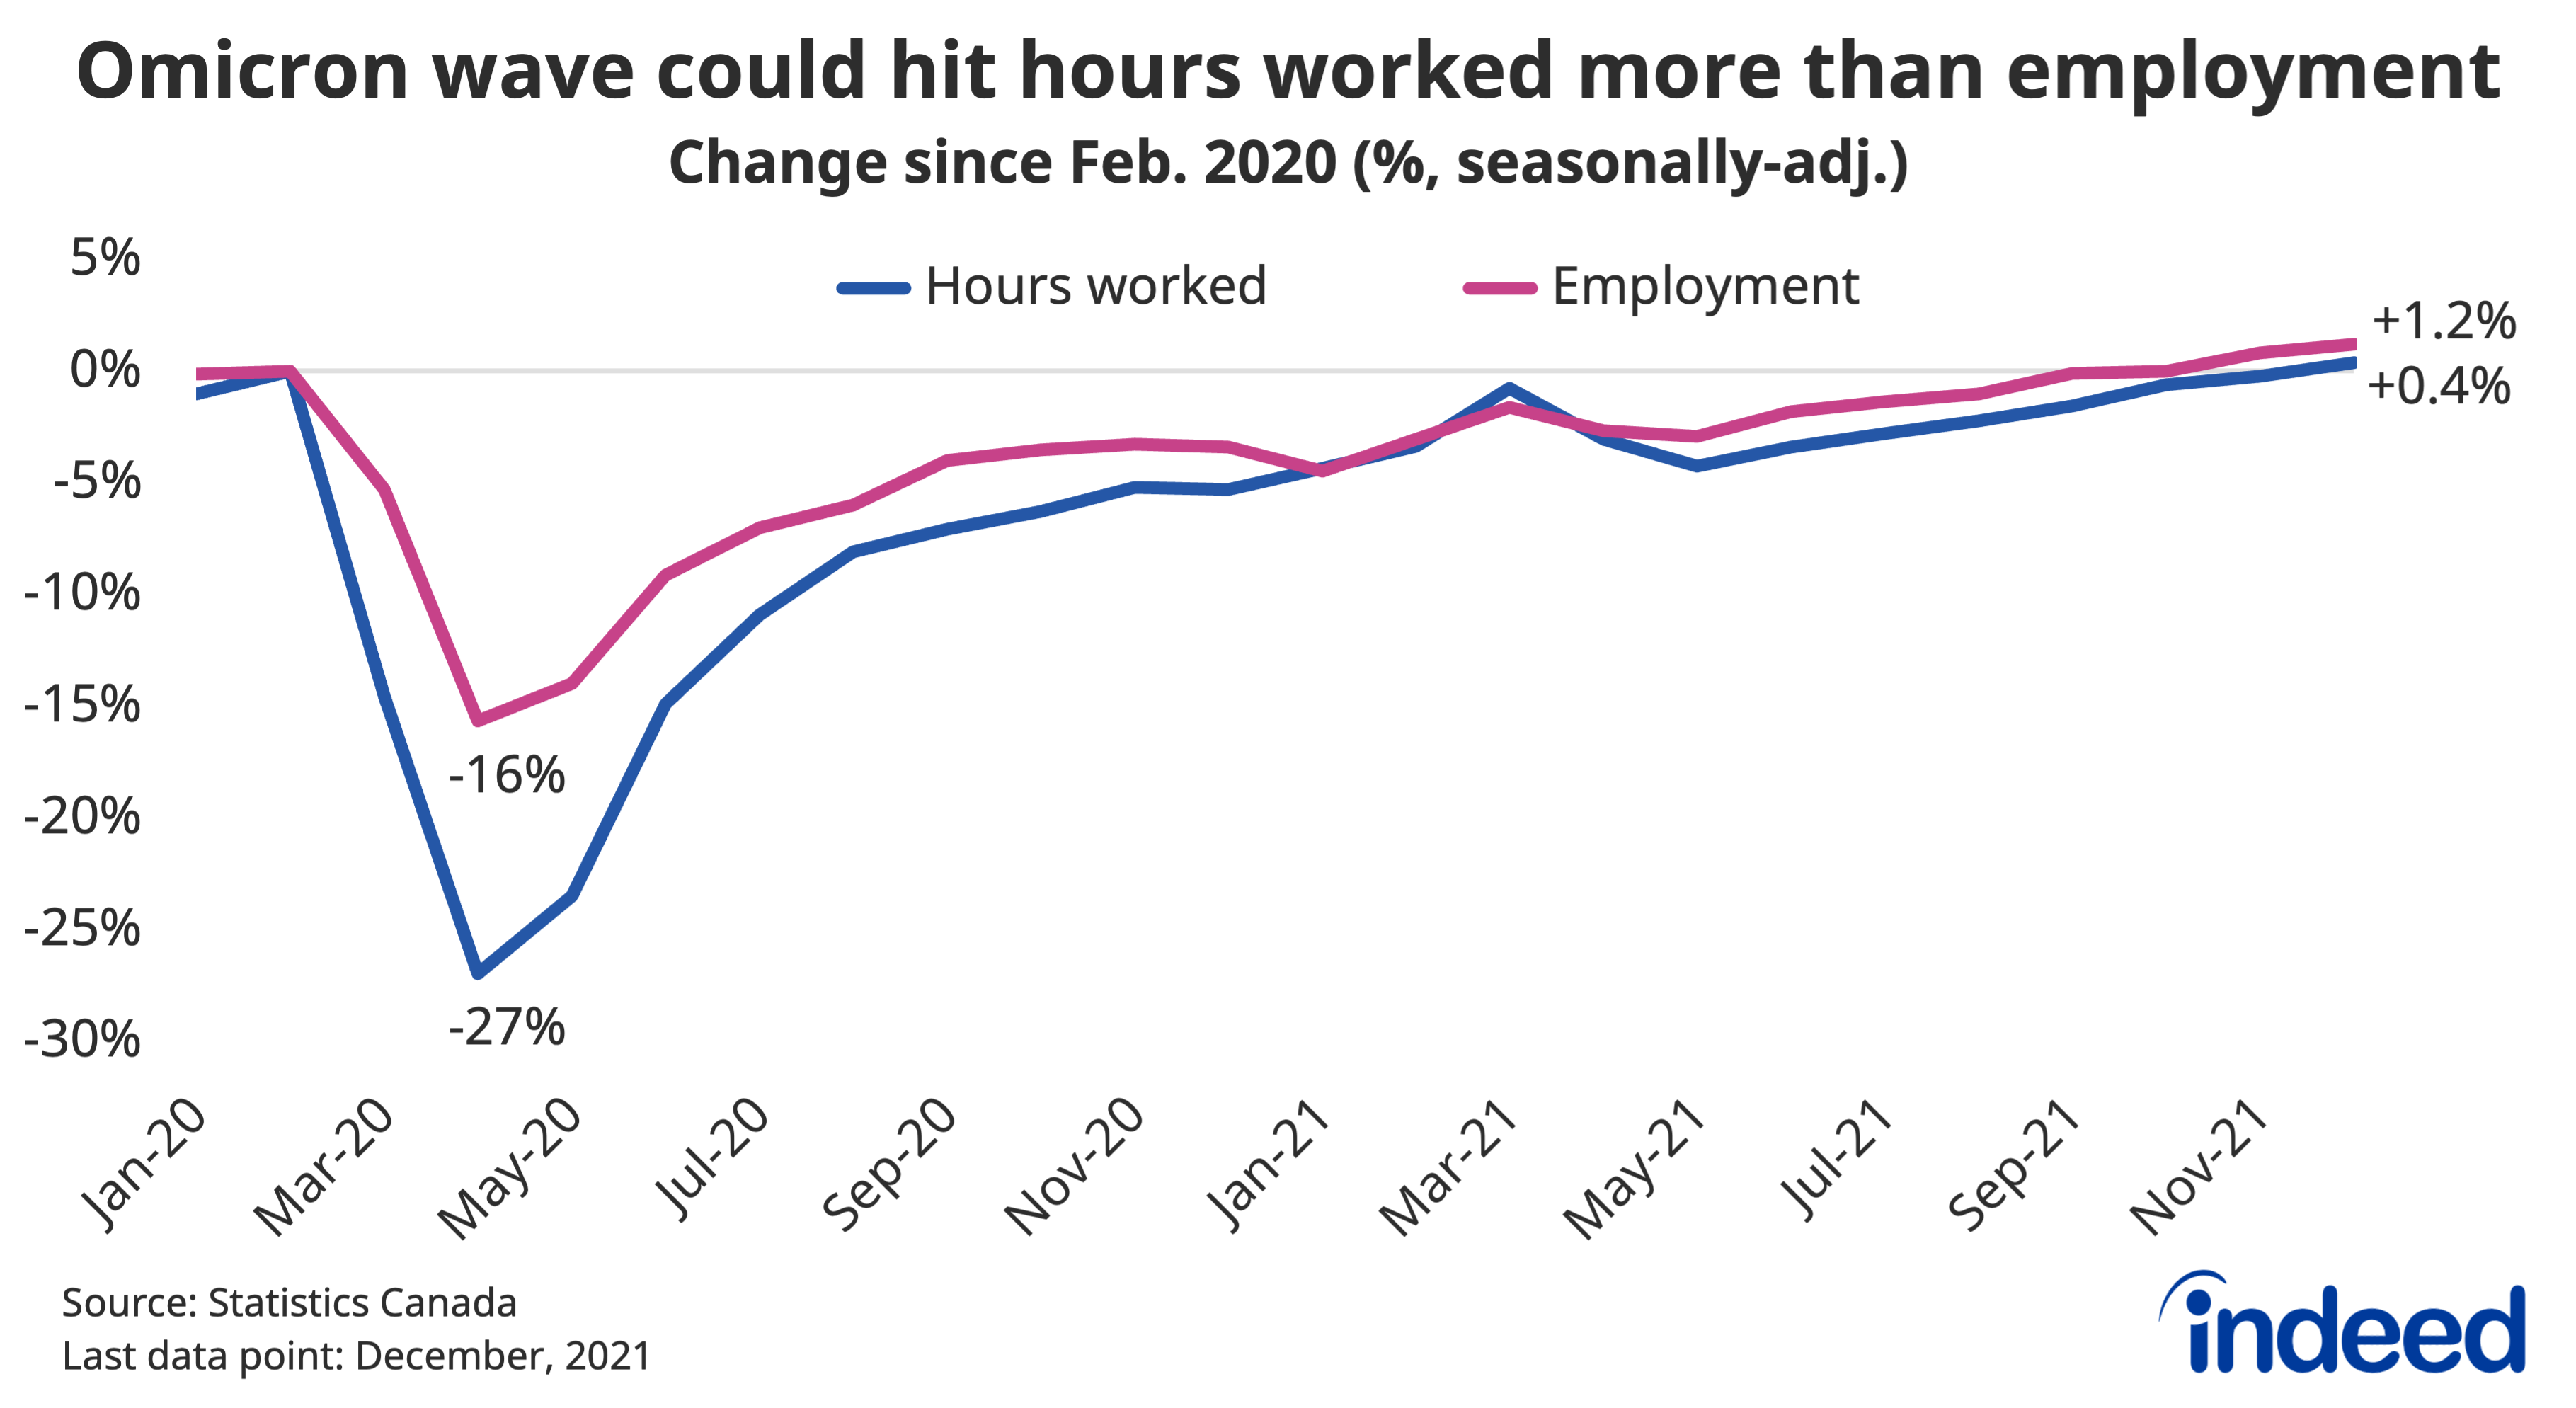 ​​Line chart titled “Omicron wave could hit hours worked more than employment.” With a vertical axis ranging from -30% to 5%, Indeed tracked the percent change in Canadian employment and total hours worked since February 2020, along a horizontal axis ranging from January 2020 to December 2021. Total hours worked fell more in early 2020 than employment, while both were up slightly from their pre-pandemic level by the end of 2021.